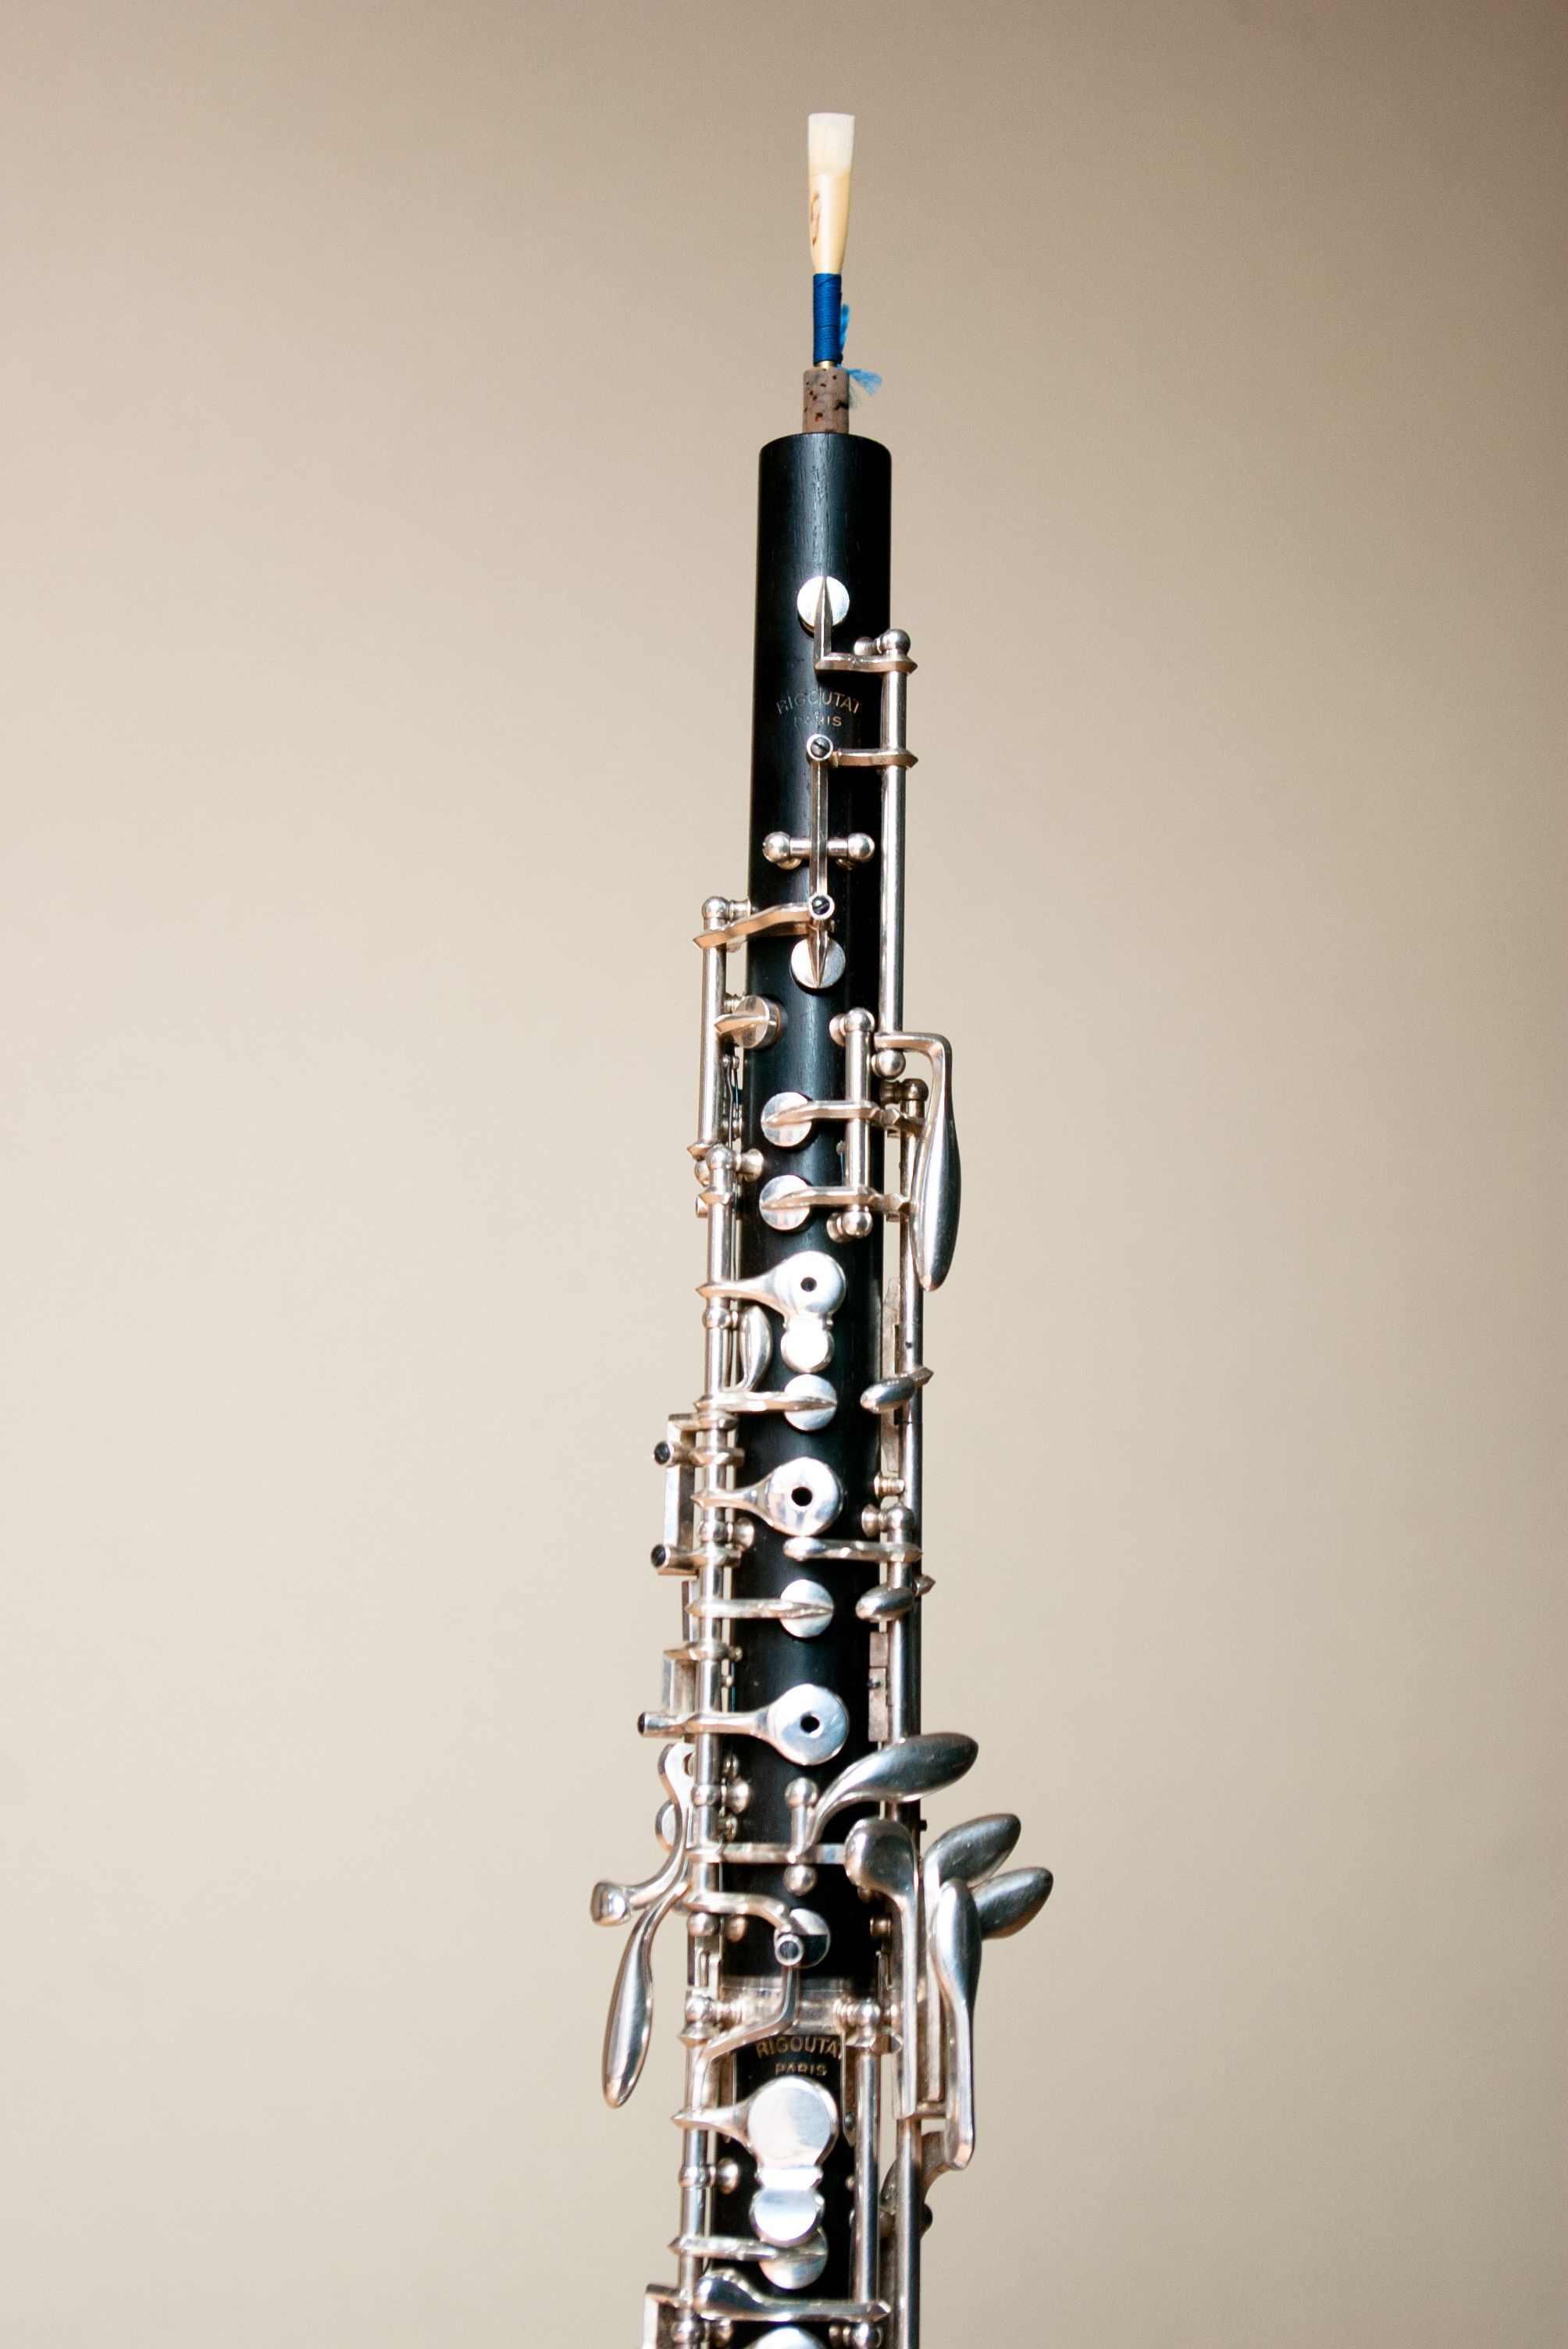 Oboe: Reeded woodwind musical instrument, A wind musical instrument shaped like a tube. 2010x3010 HD Wallpaper.